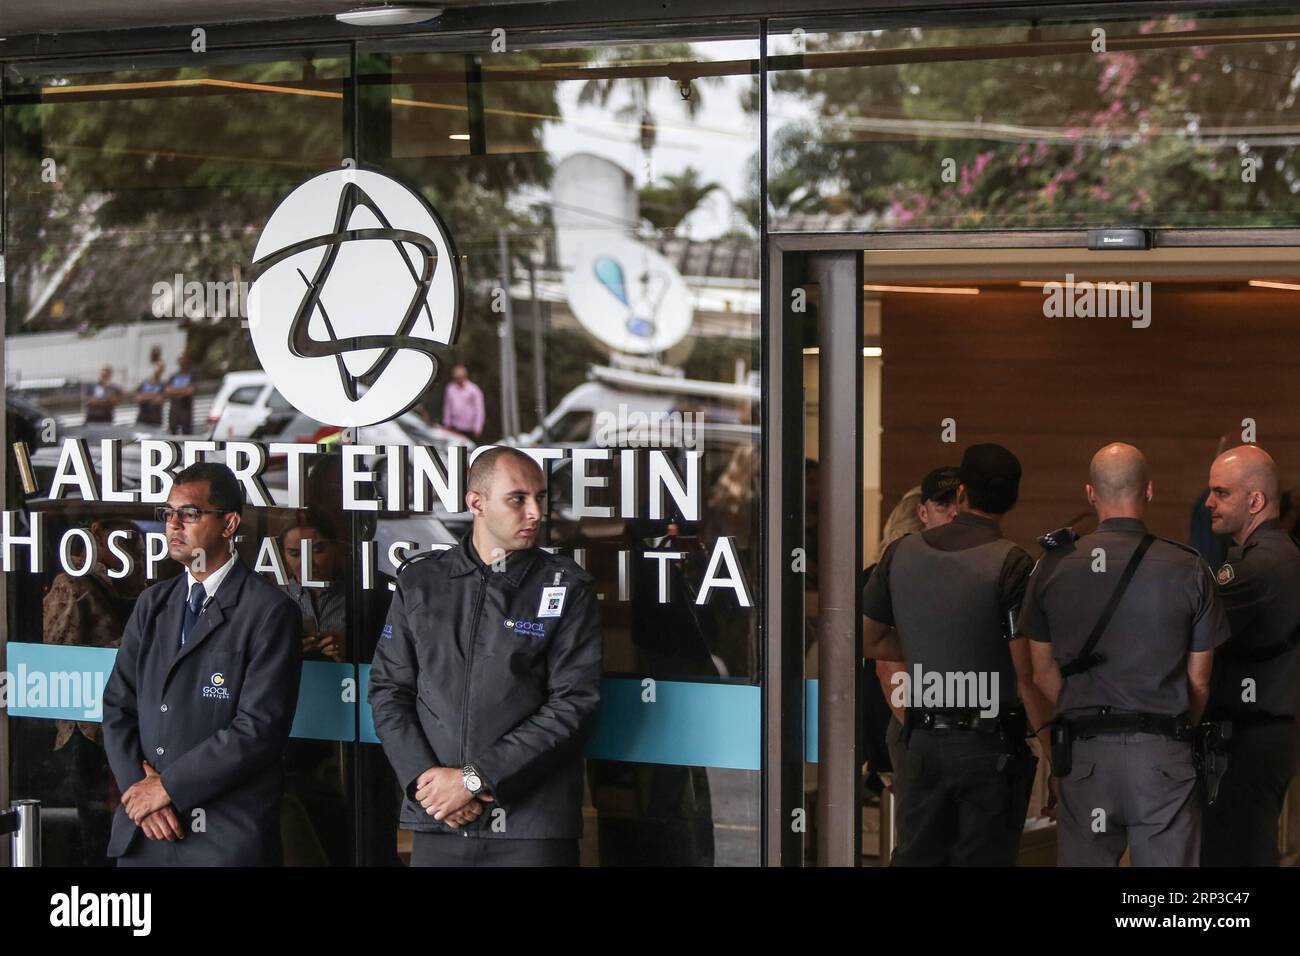 (180930) -- SAO PAULO, Sept. 30, 2018 -- Security personnel guard the entrance before the candidate from the Social Liberal Party (PSL, for its acronym in Spanish) for the Brazilian presidential elections, Jair Bolsonaro, leaves the Albert Einstein Israeli Hospital, in Sao Paulo, Brazil, on Sept. 29, 2018. Brazil s far-right presidential candidate and leader in the polls, Jair Bolsonaro, was discharged on Saturday after remaining 23 days hospitalized due to the attack he suffered during a campaign act, according to Sao Paulo s Albert Einstein Israeli Hospital.) (da) (cr) (qxy) BRAZIL-SAO PAULO Stock Photo